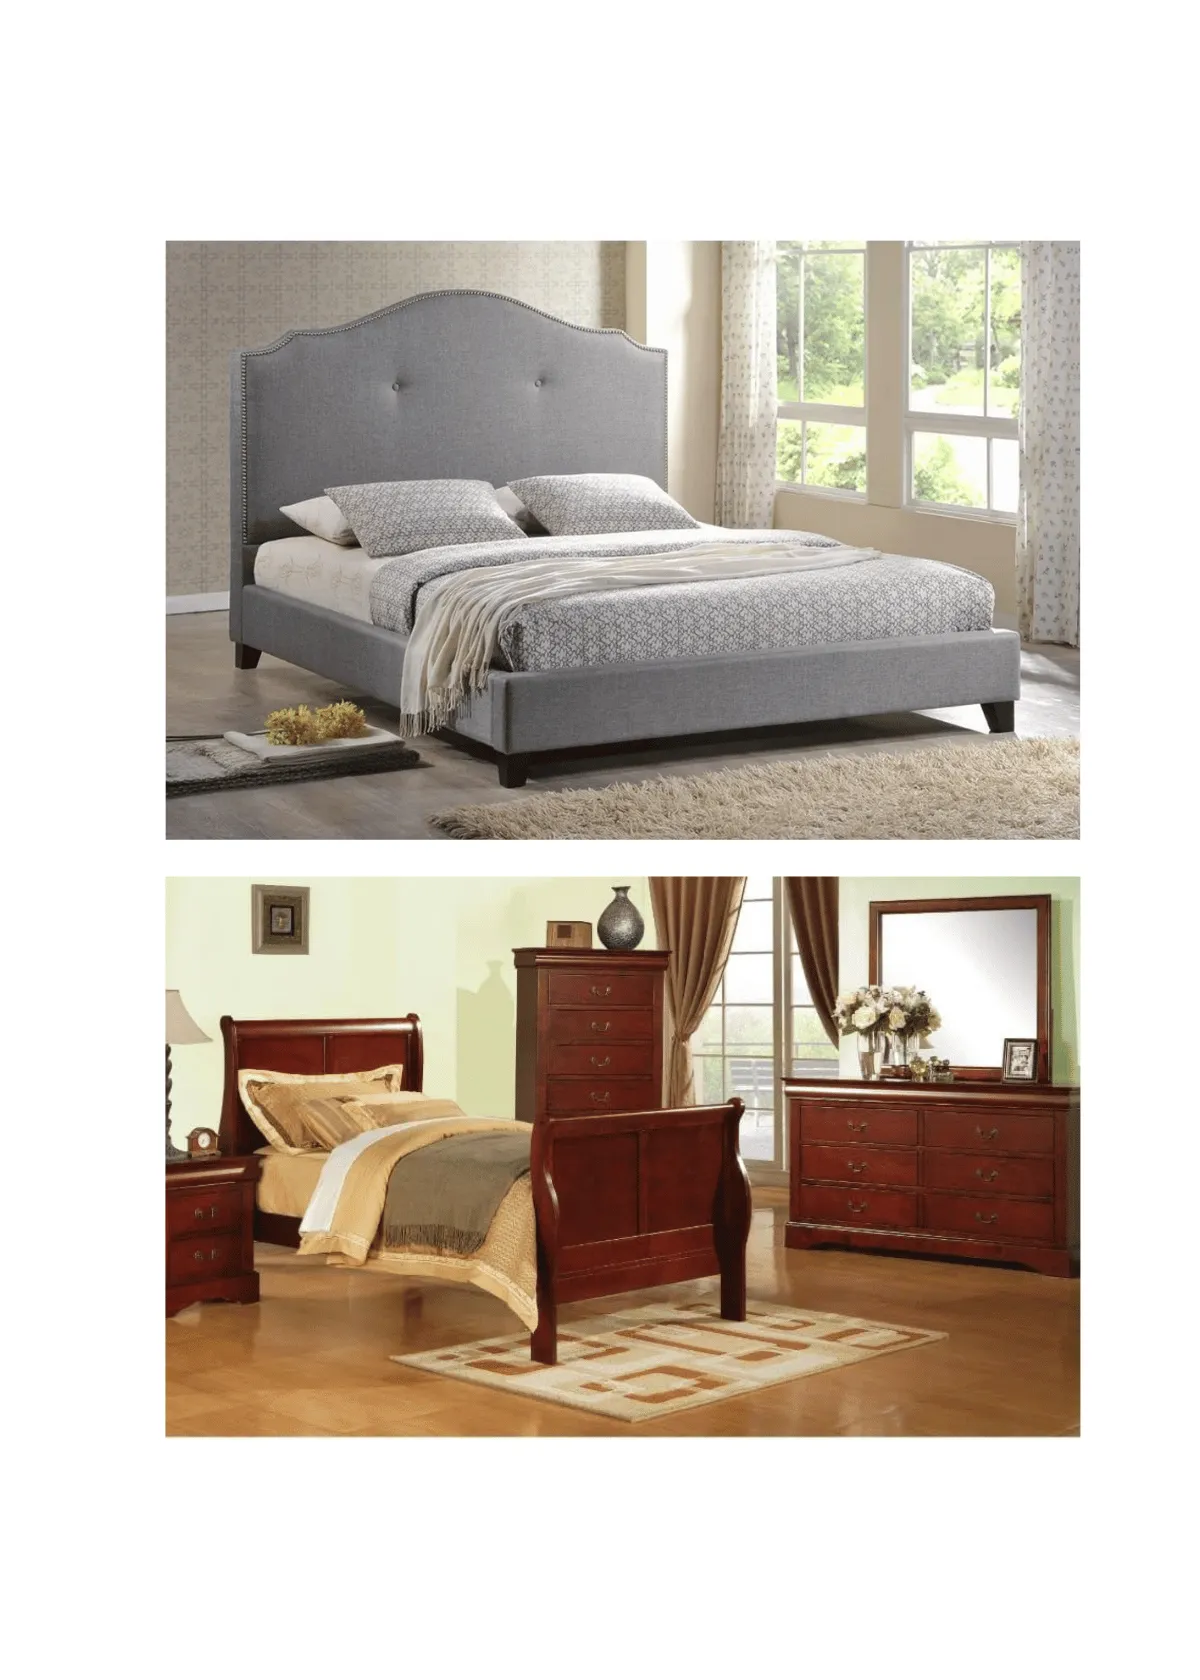 "The Best Headboards and Footboards for Your Bed Frame's Style"